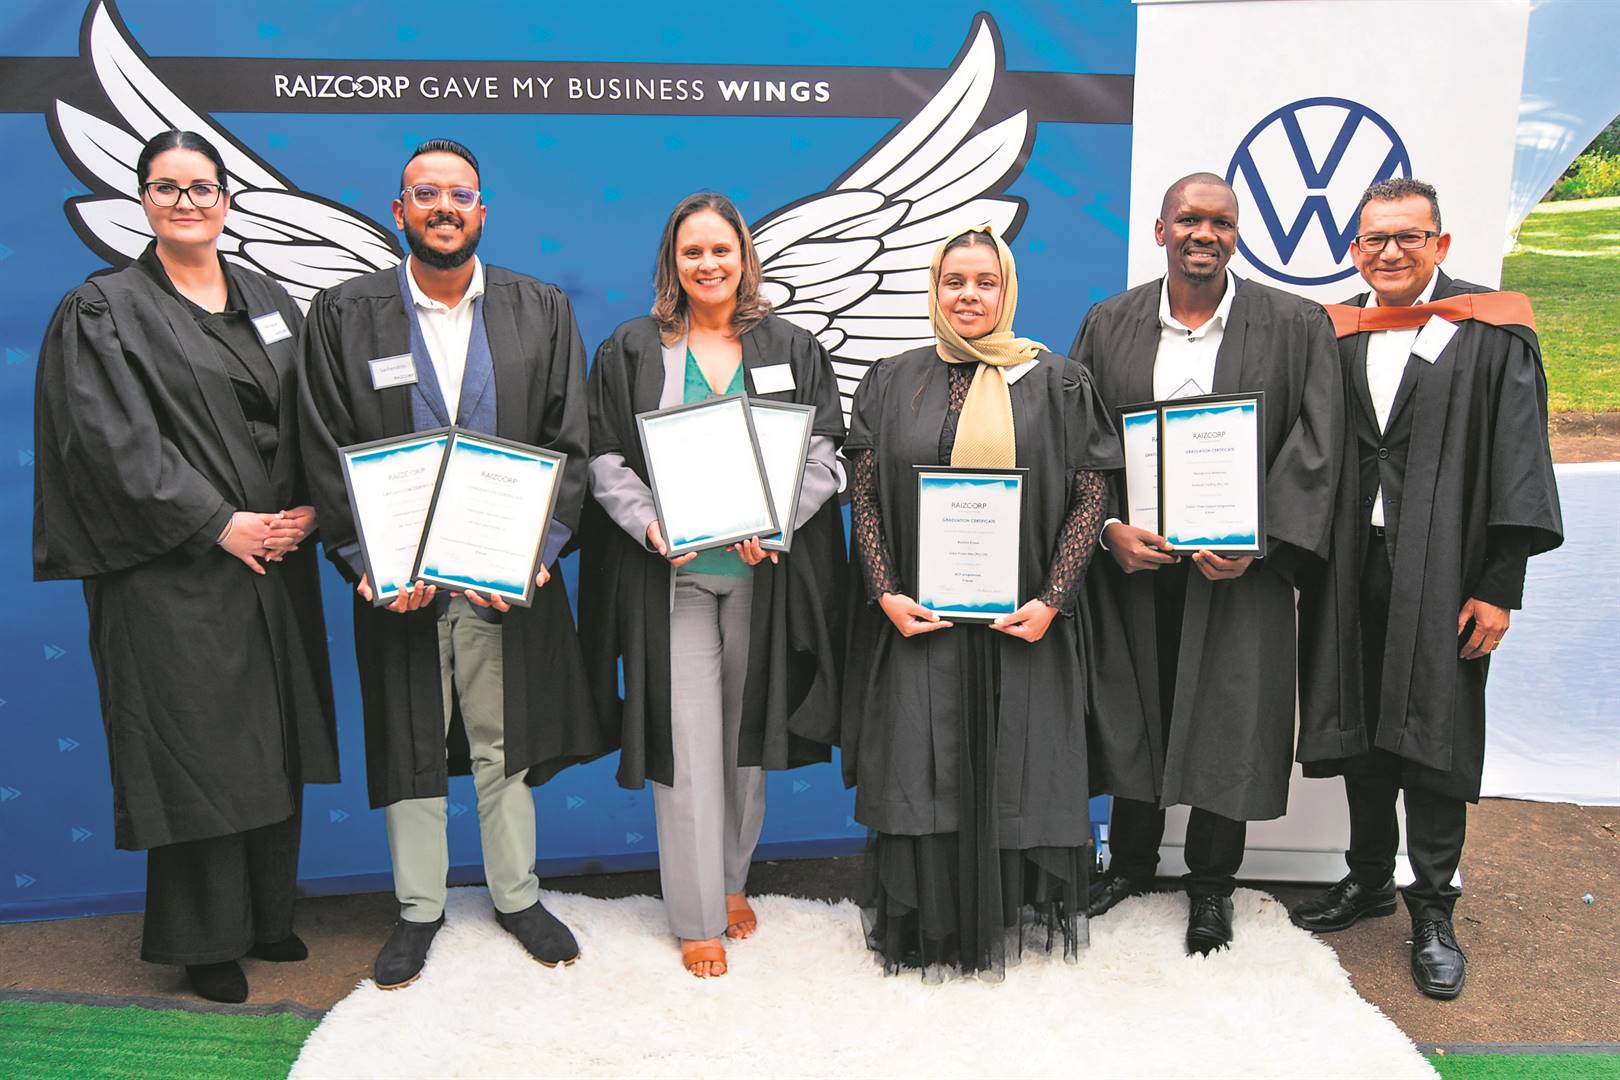 From left are Monique de Villiers (Raizcorp Personal, Marketing and Sales guide), Sashendrin Naidoo (BK Steel and Profiles), Claire Kivedo (Overall Events), Bashira Evans (Solar Projectiles), Monde Mhletywa (Anelisah Trading) and Vernon Naidoo (VW Community Trust Manager). 